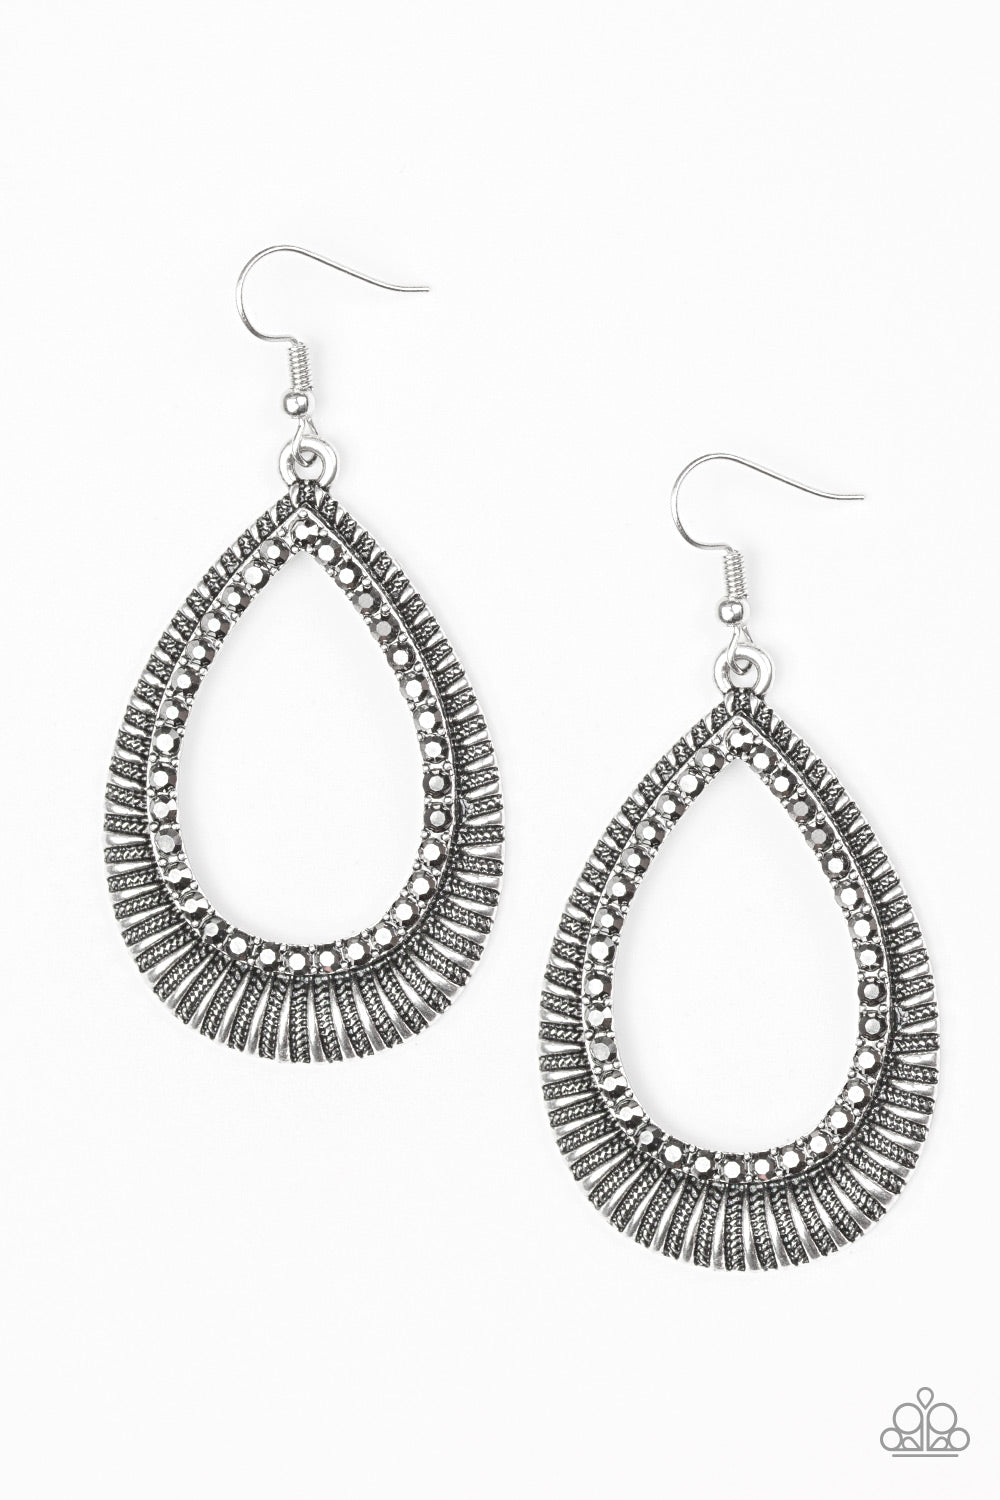 Right As REIGN - Silver Earrings - Paparazzi Accessories - Paparazzi Accessories 